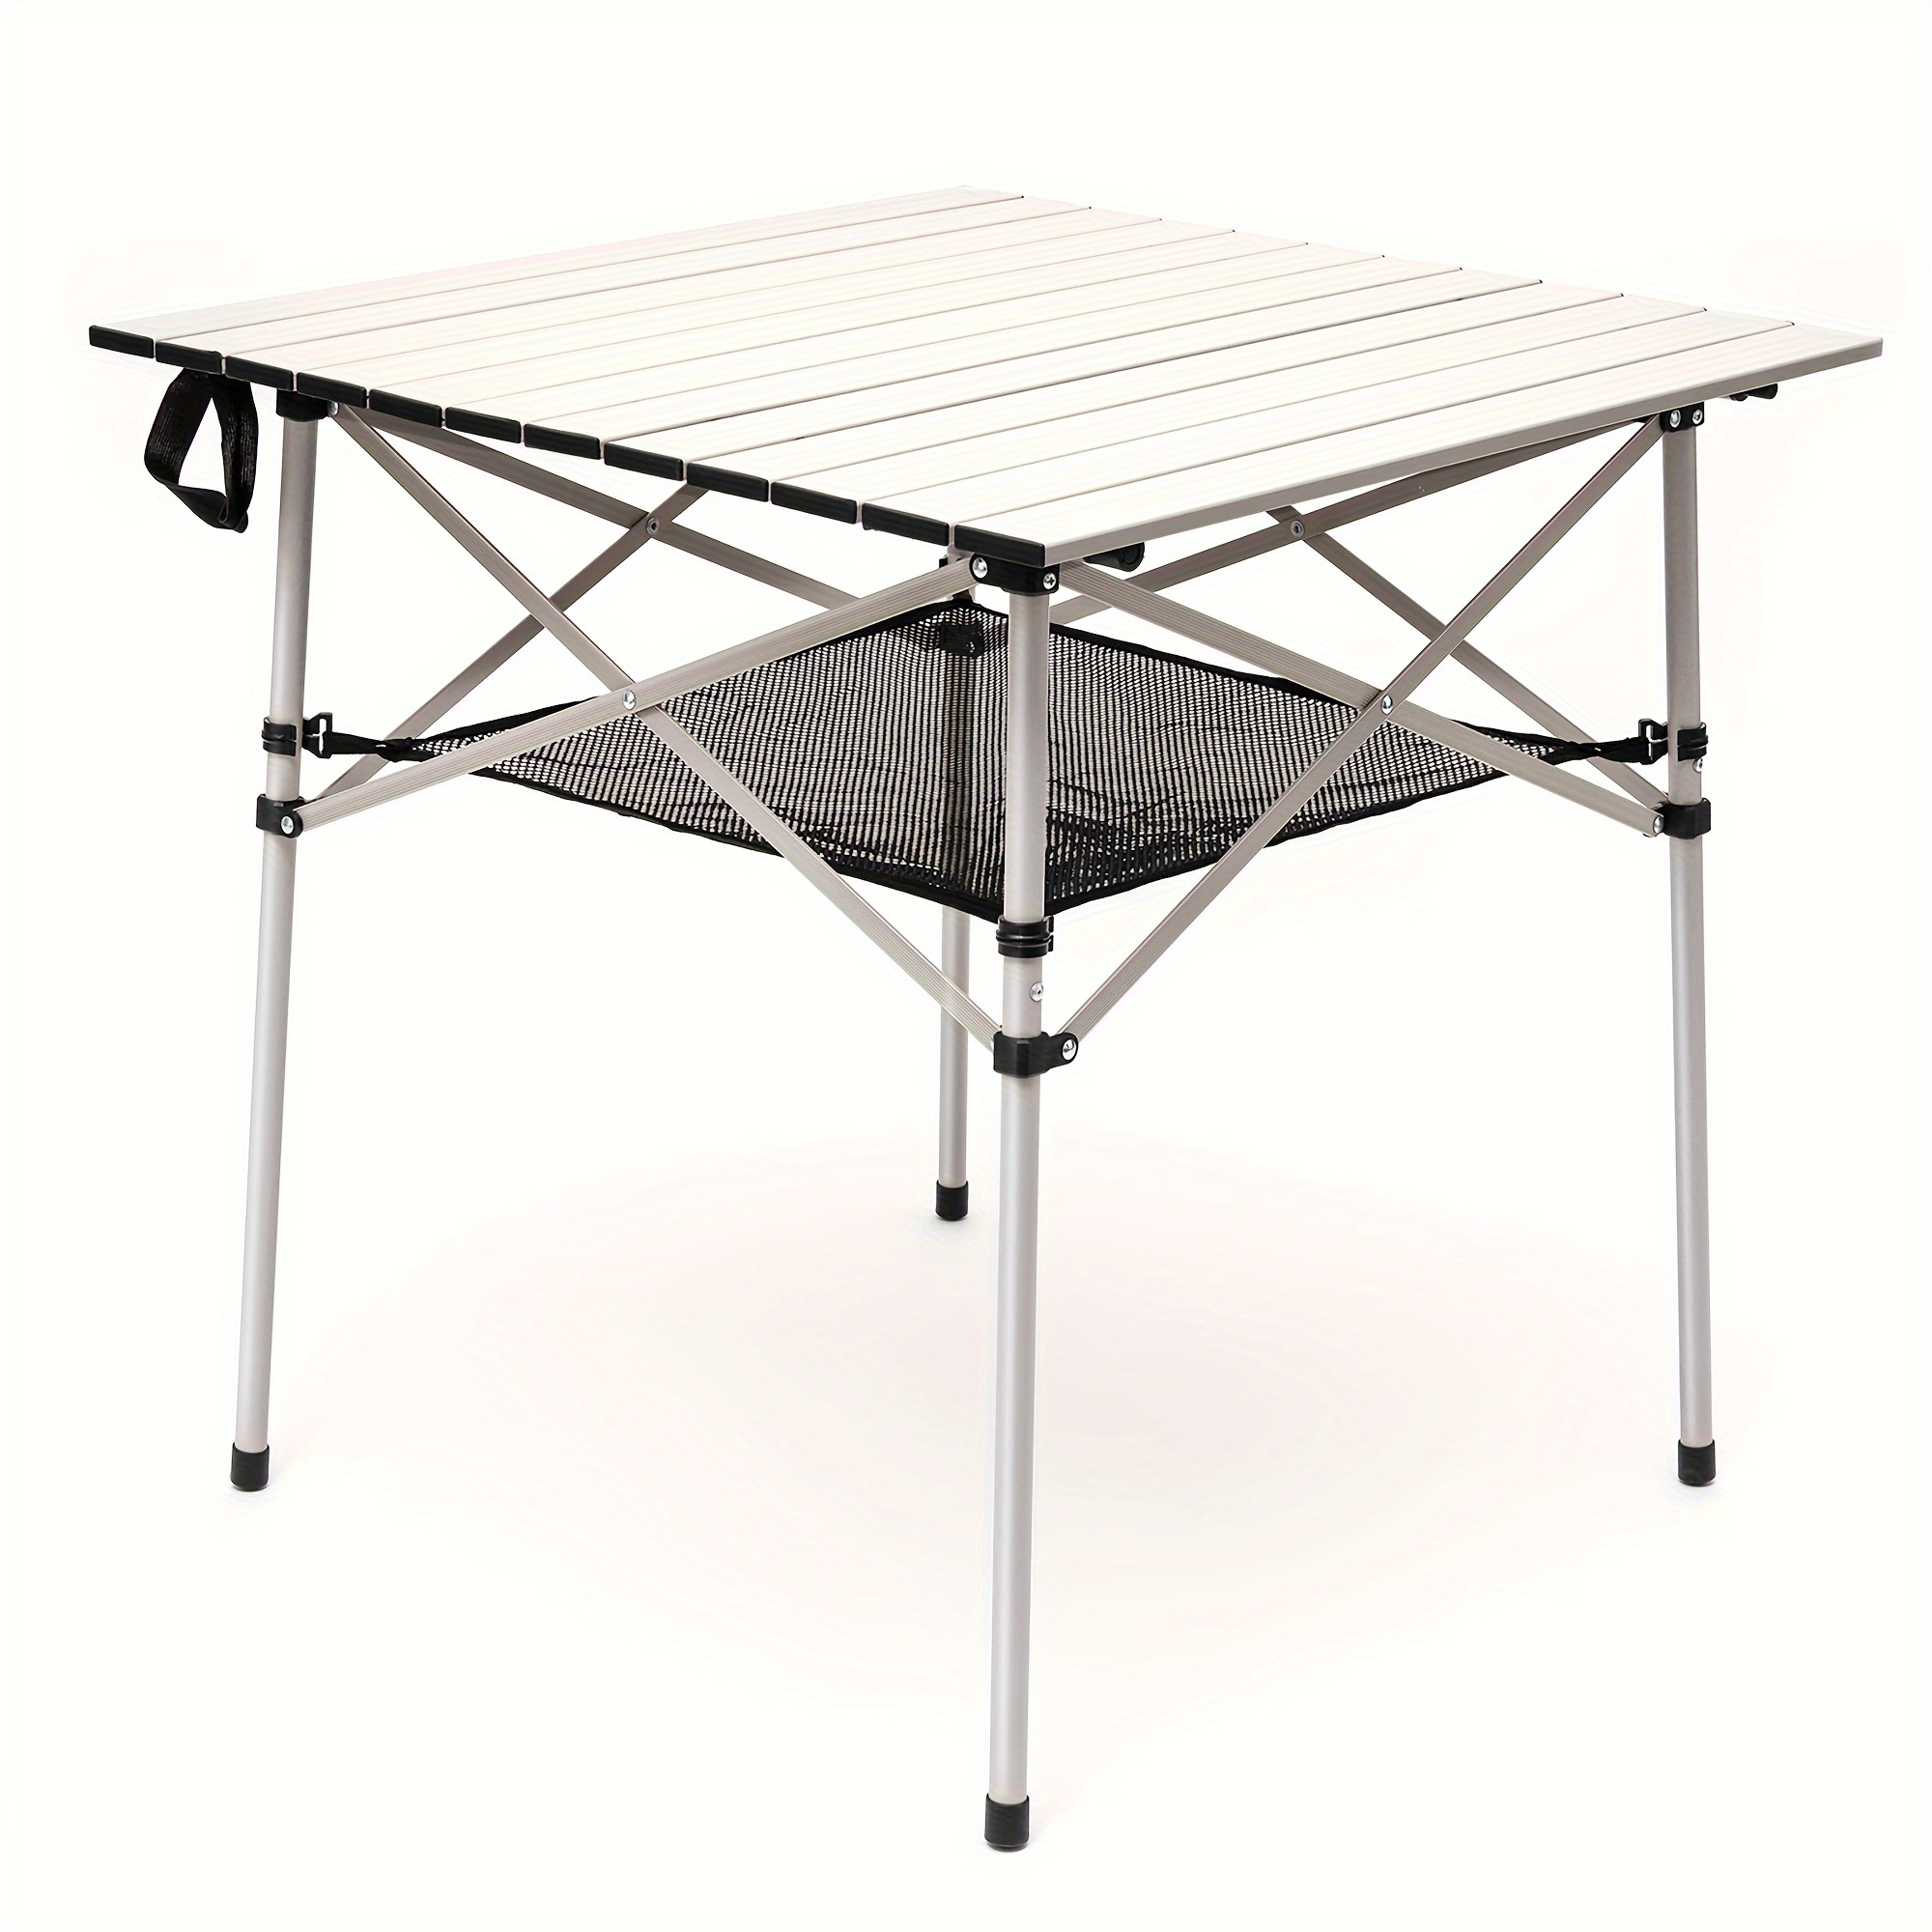 

Sunnyfeel Outdoor Folding Table | Lightweight Compact Aluminum Camping Table, Roll Up Top 4 People Portable Camp Square Tables With Carry Bag For Picnic/ Cooking/ Beach/ Travel/ Bbq